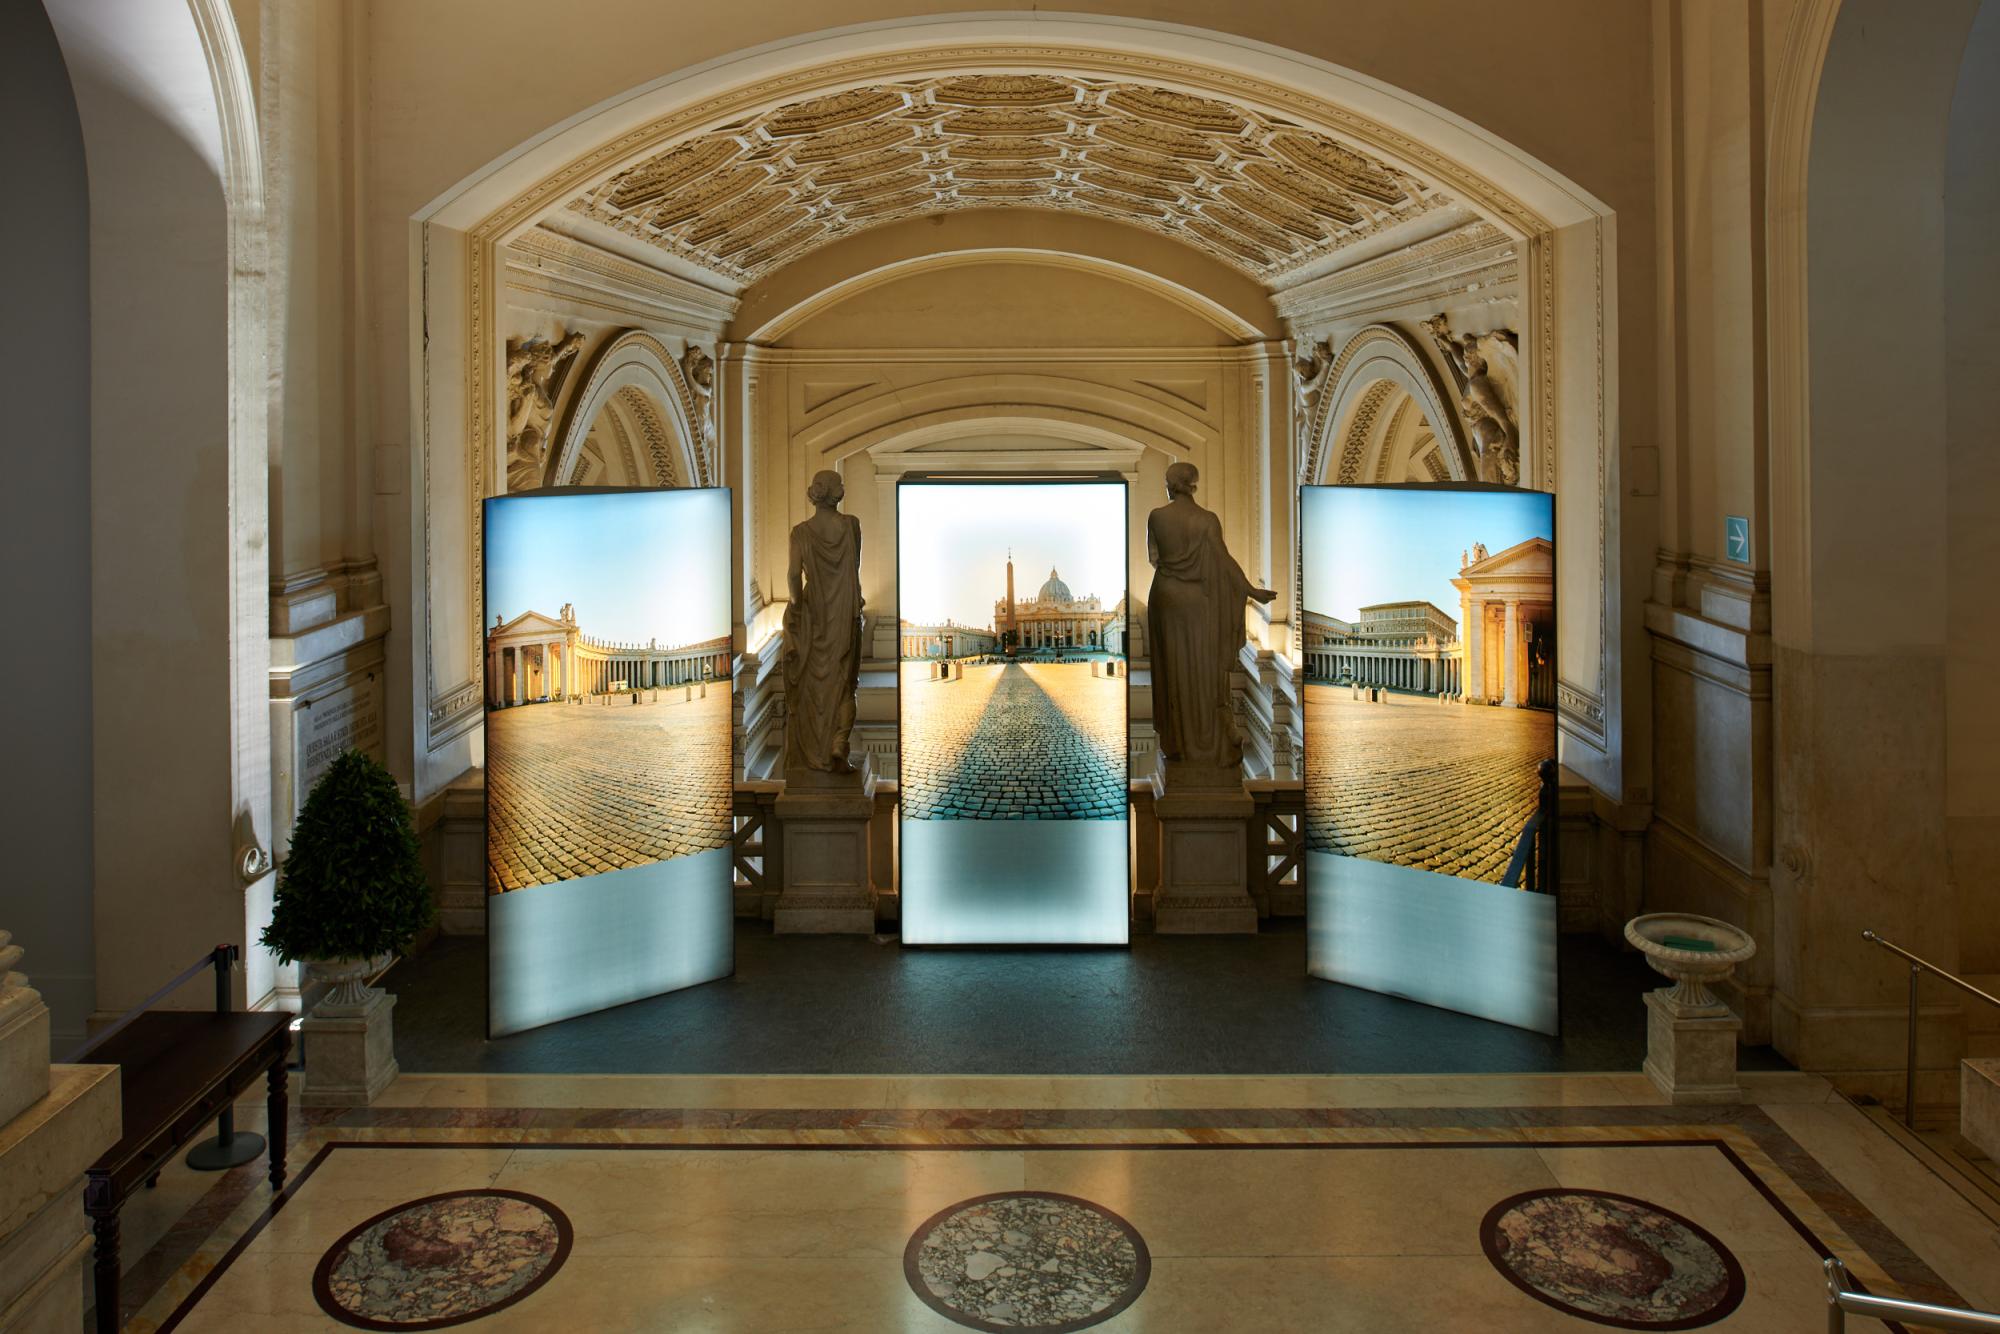 ROMA SILENZIOSA BELLEZZA exhibition has begun: 28,481 visitors to the Vittoriano in the first three days of opening.